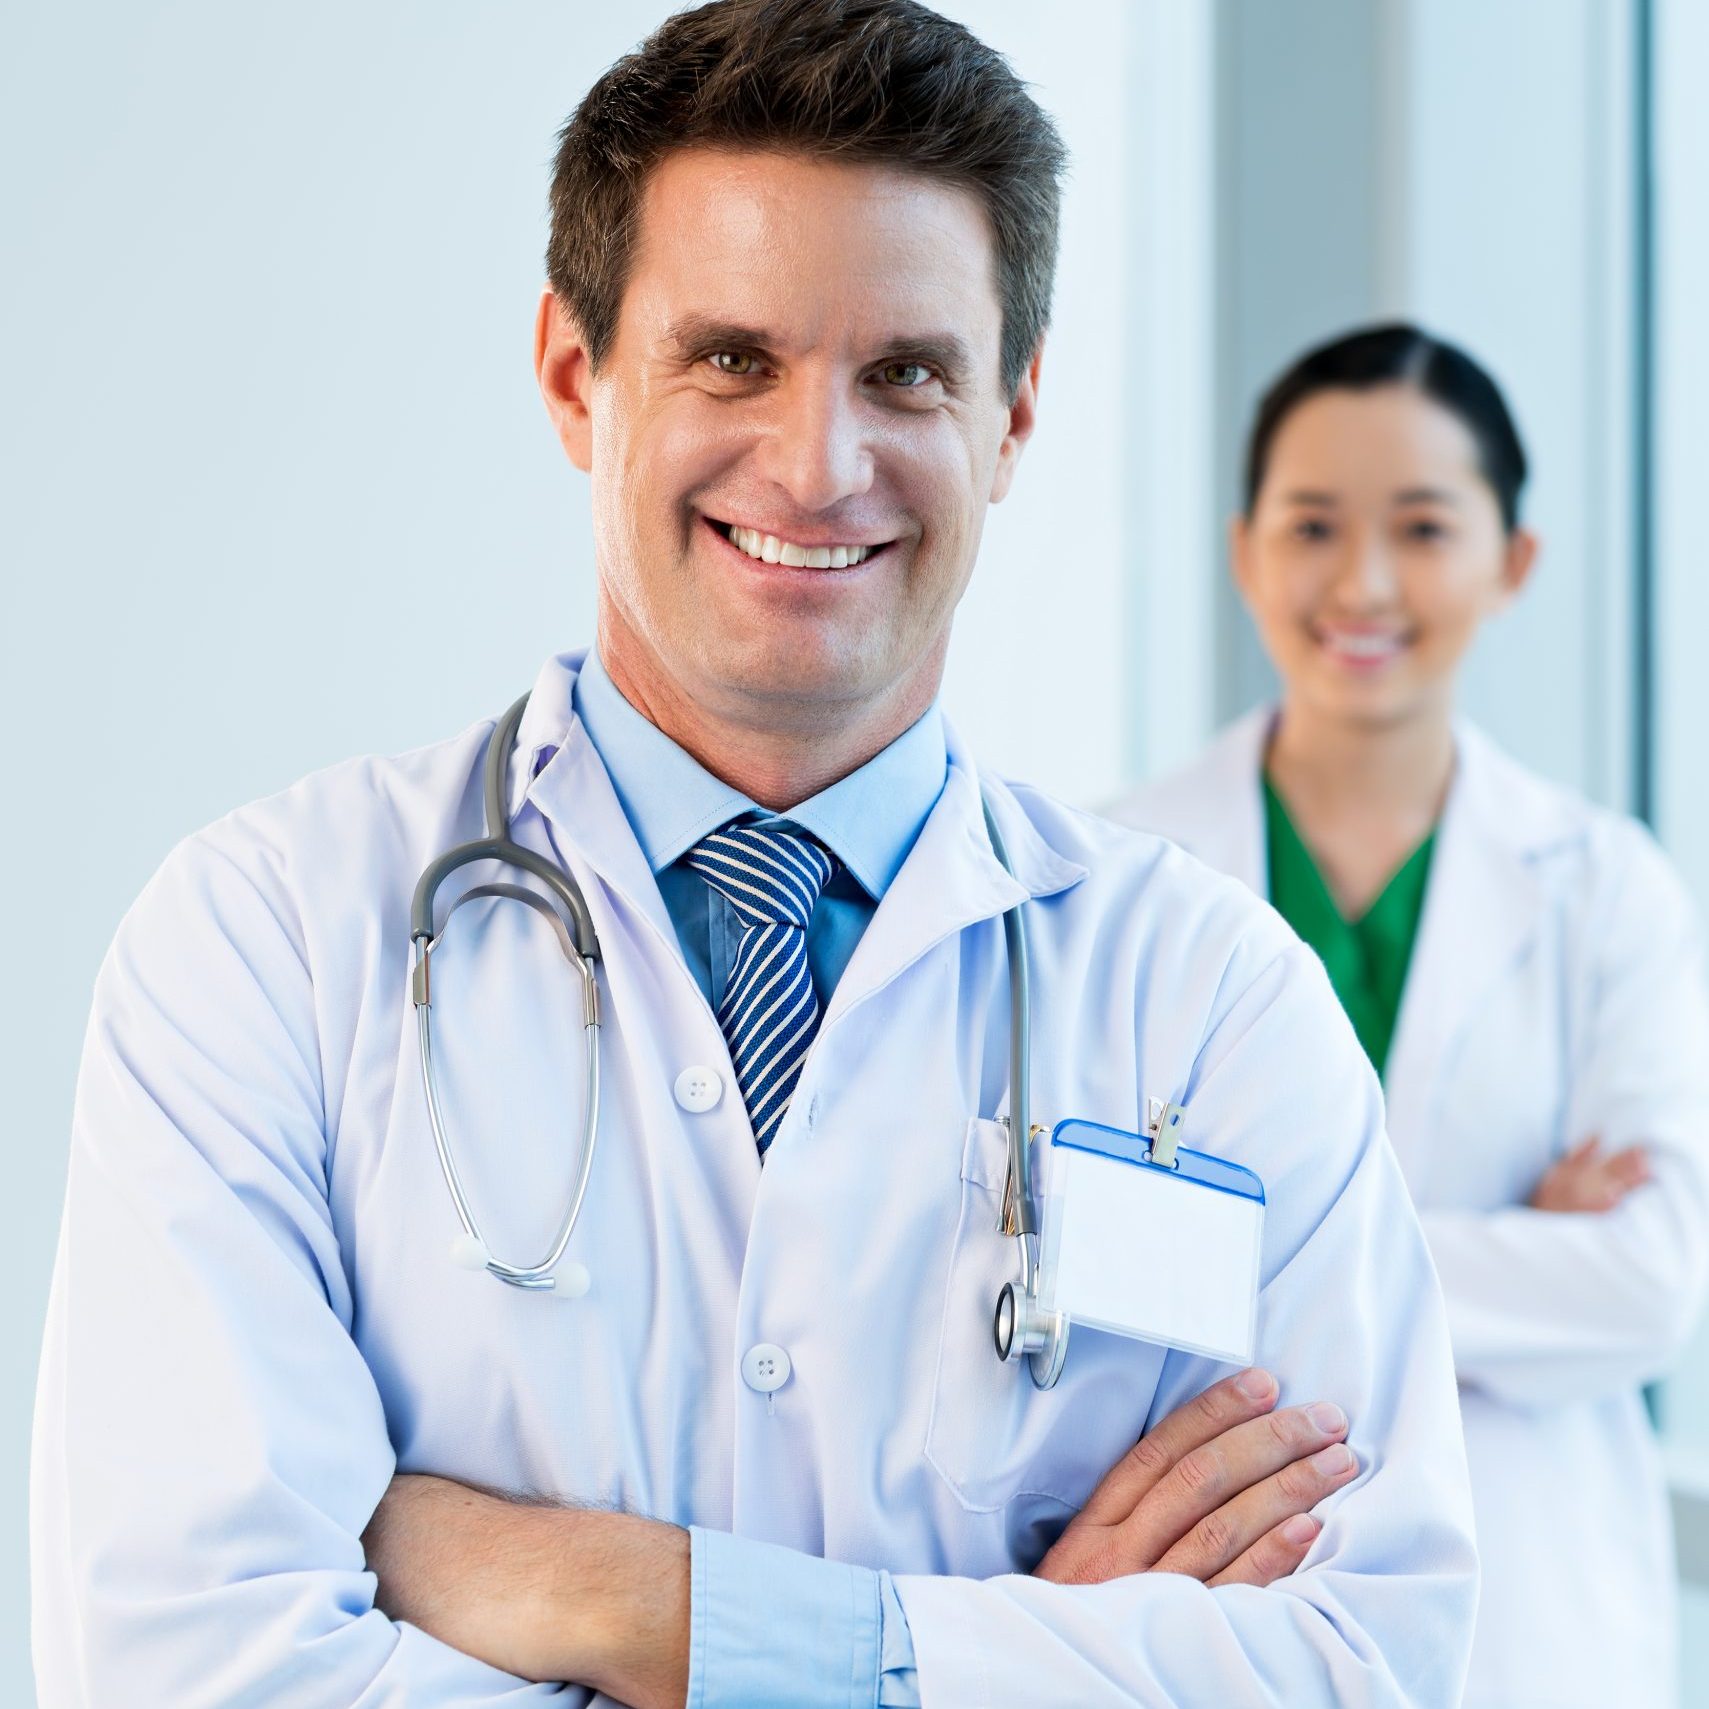 Medical Practice Business Loans